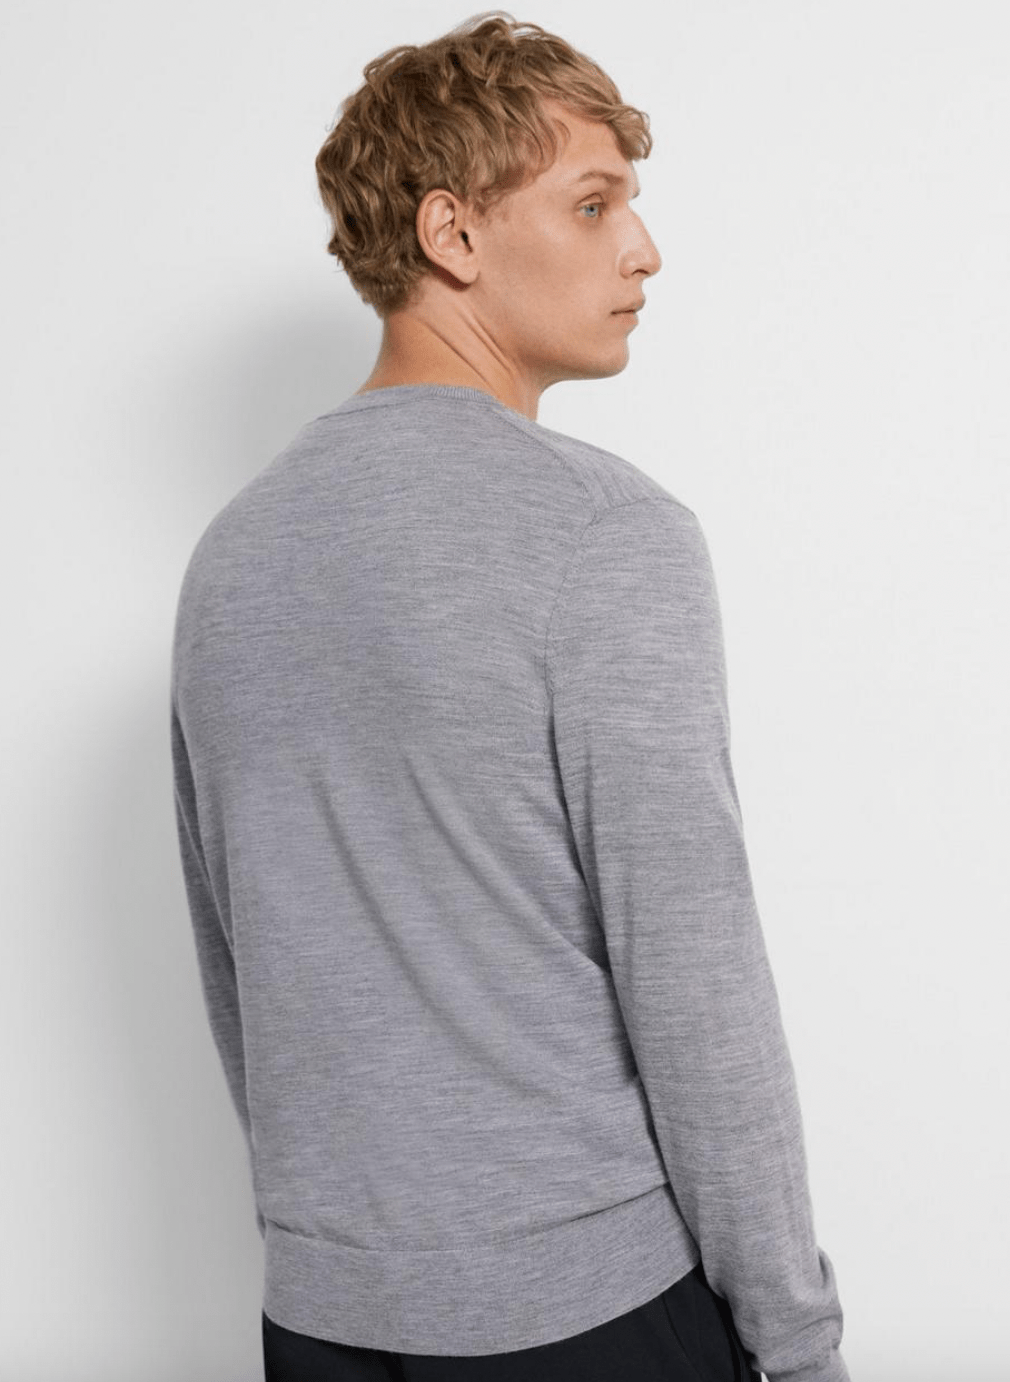 Theory V Neck Sweater in Cool Heather Grey - Estilo Boutique